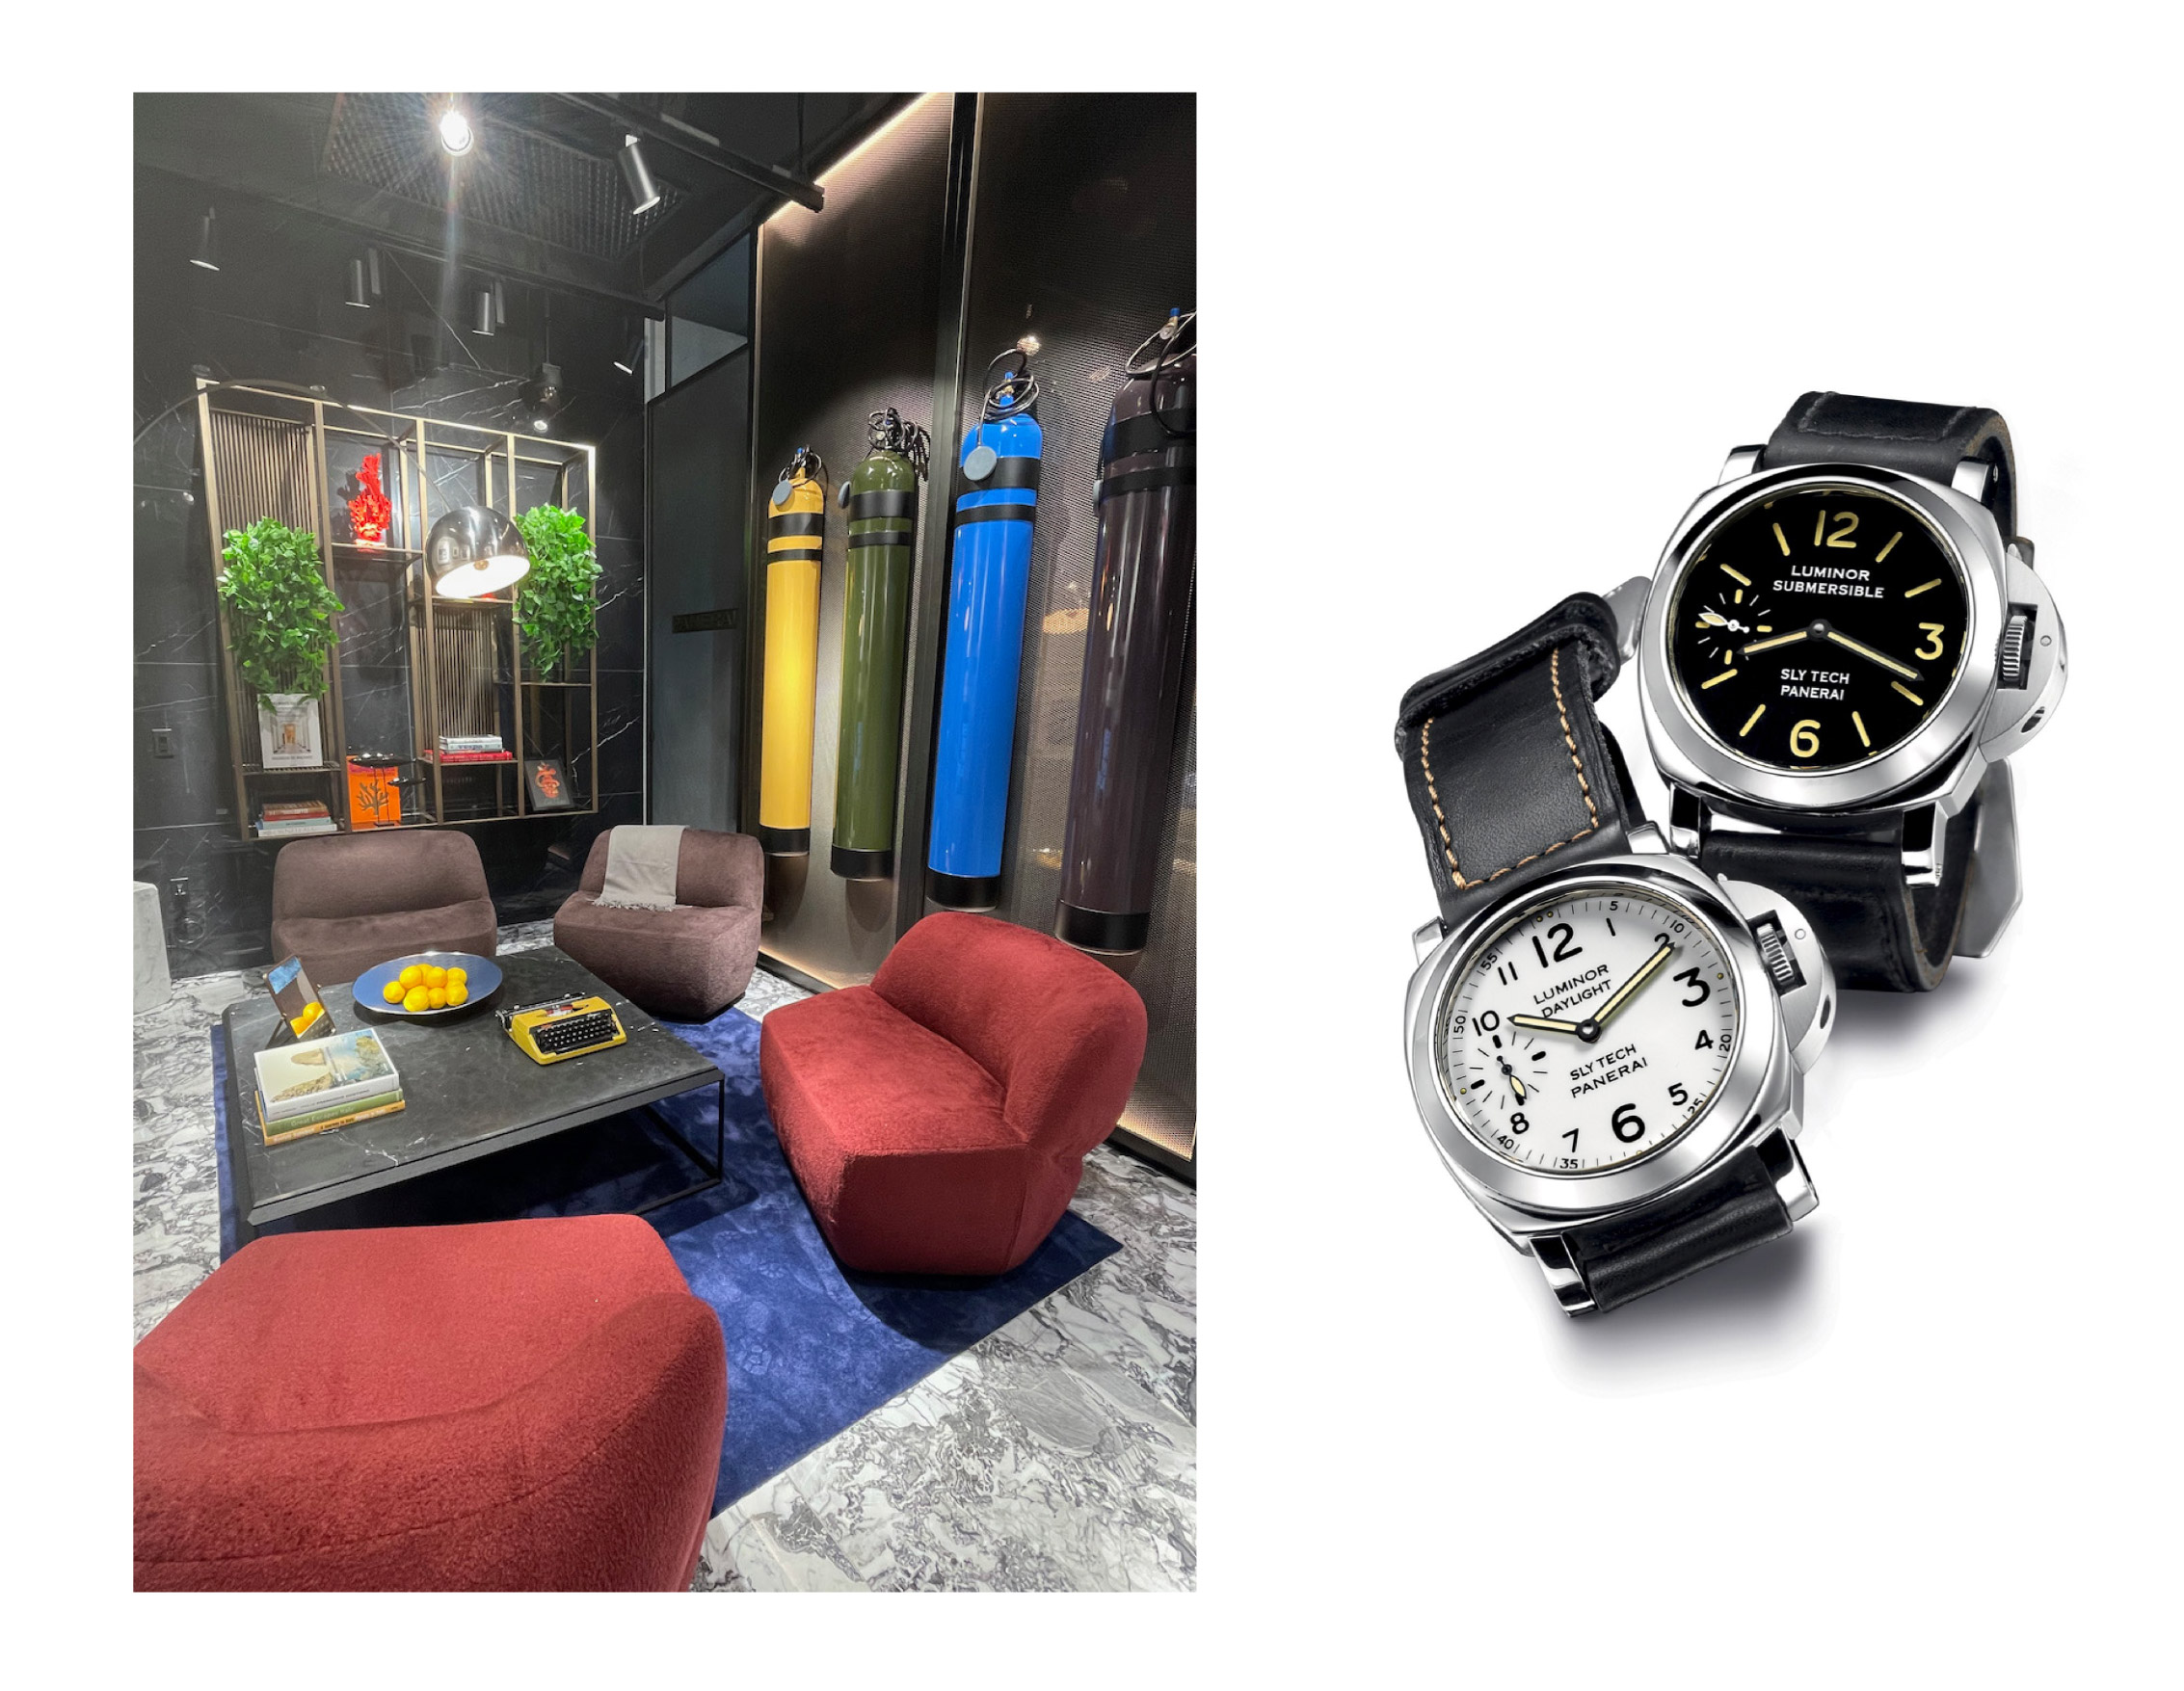 Interior of Panerai boutique at Highland Park Village and Luminor Daylight special edition